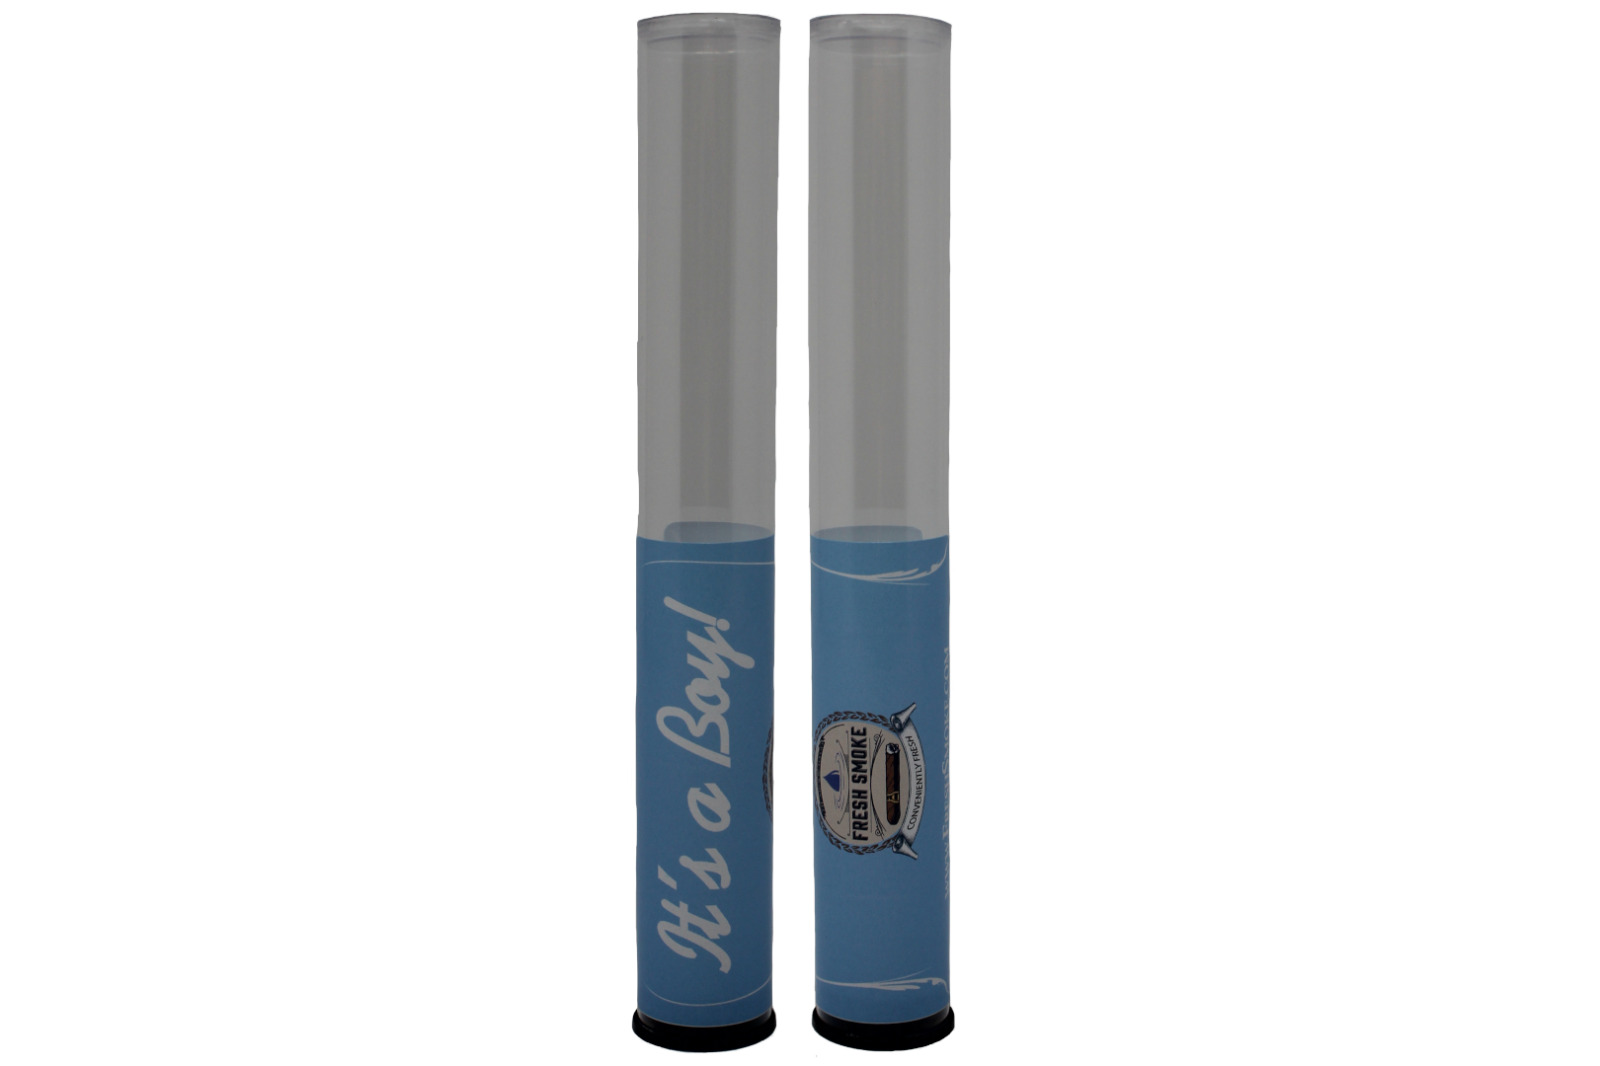 It's A Boy - 6 Pack Cigar Tubes with 4 gram HUMI-SMART 2-Way Humidity Control